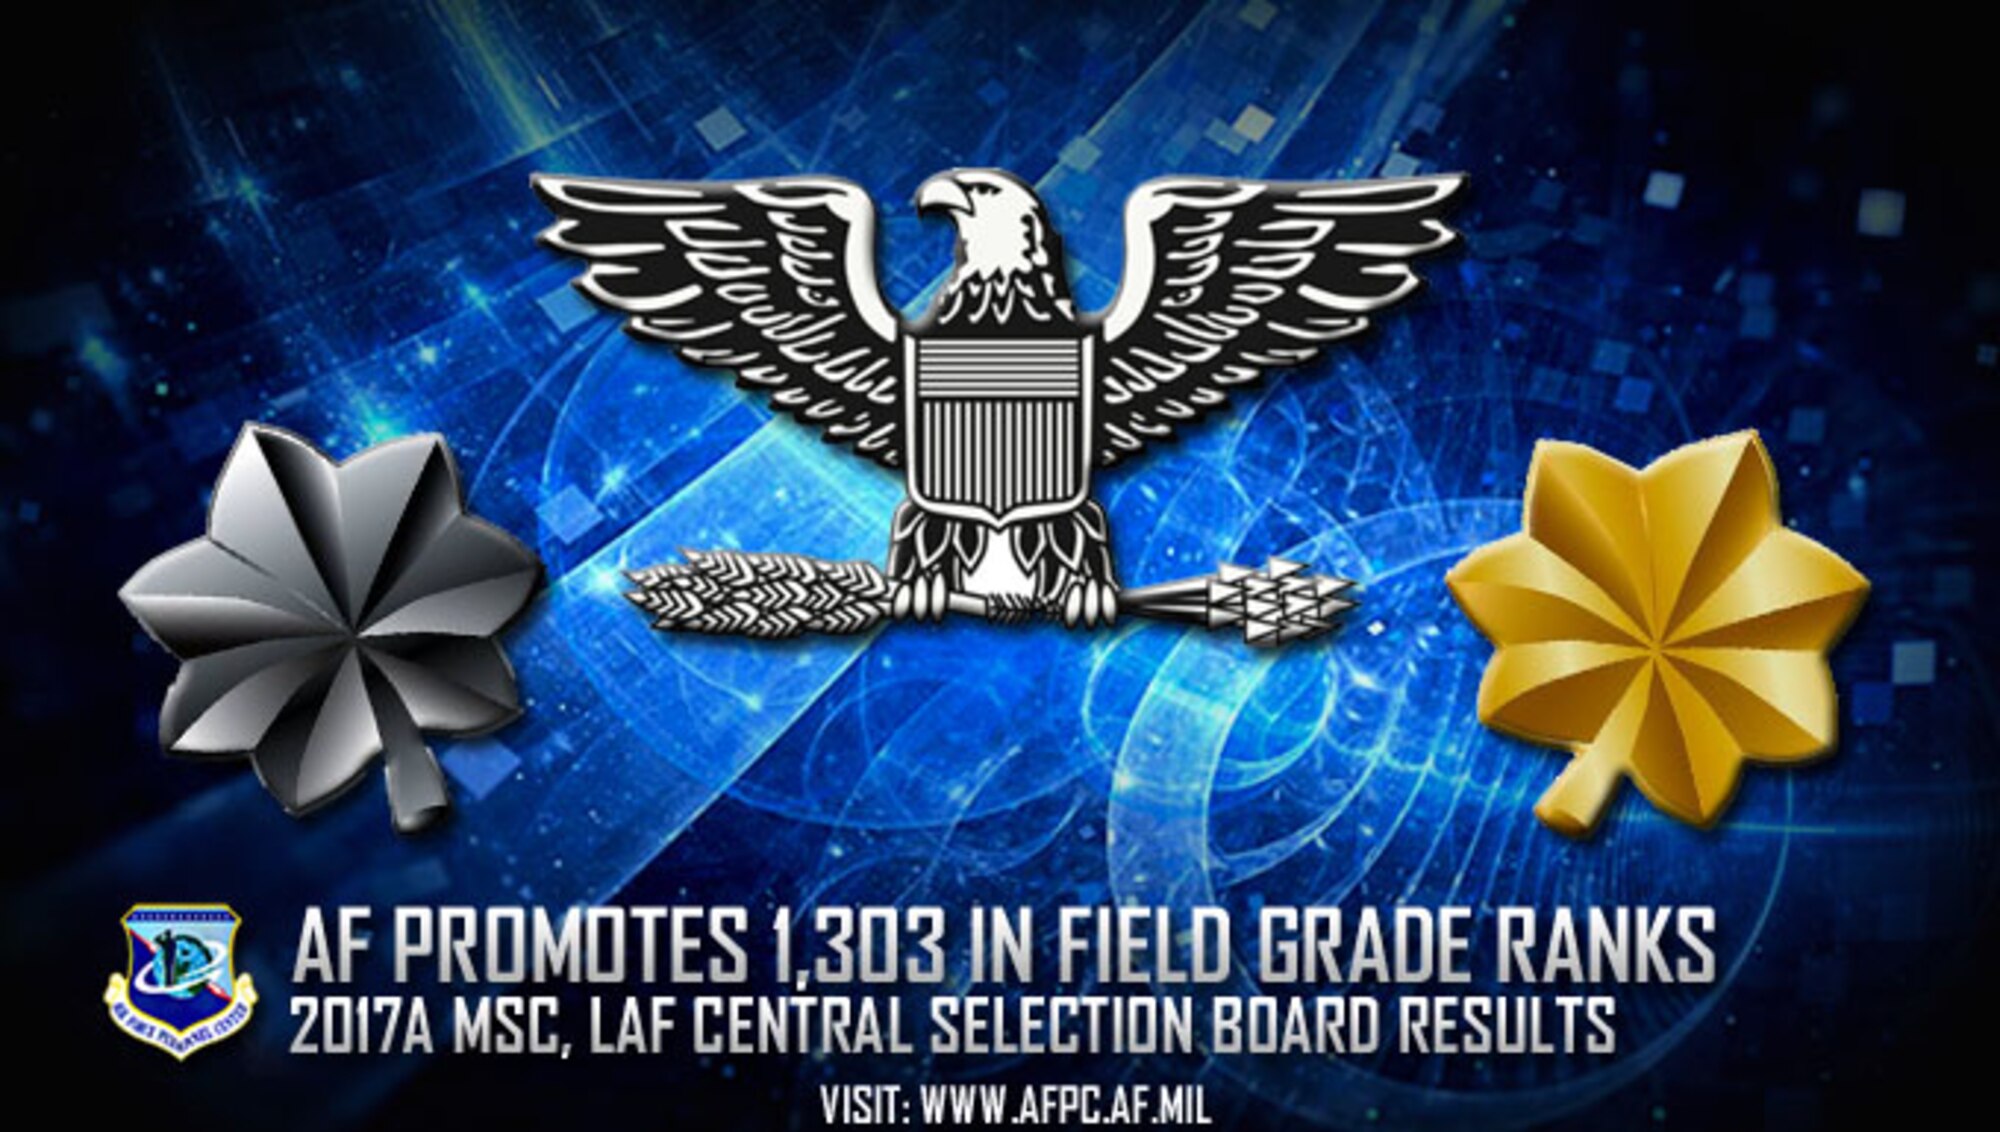 The Air Force has selected 1,303 officers for promotion as a result of the 2017A central selection board for colonel, lieutenant colonel and major in the Medical Service Corps and Line of the Air Force competitive categories. (U.S. Air Force graphic by Kat Bailey)